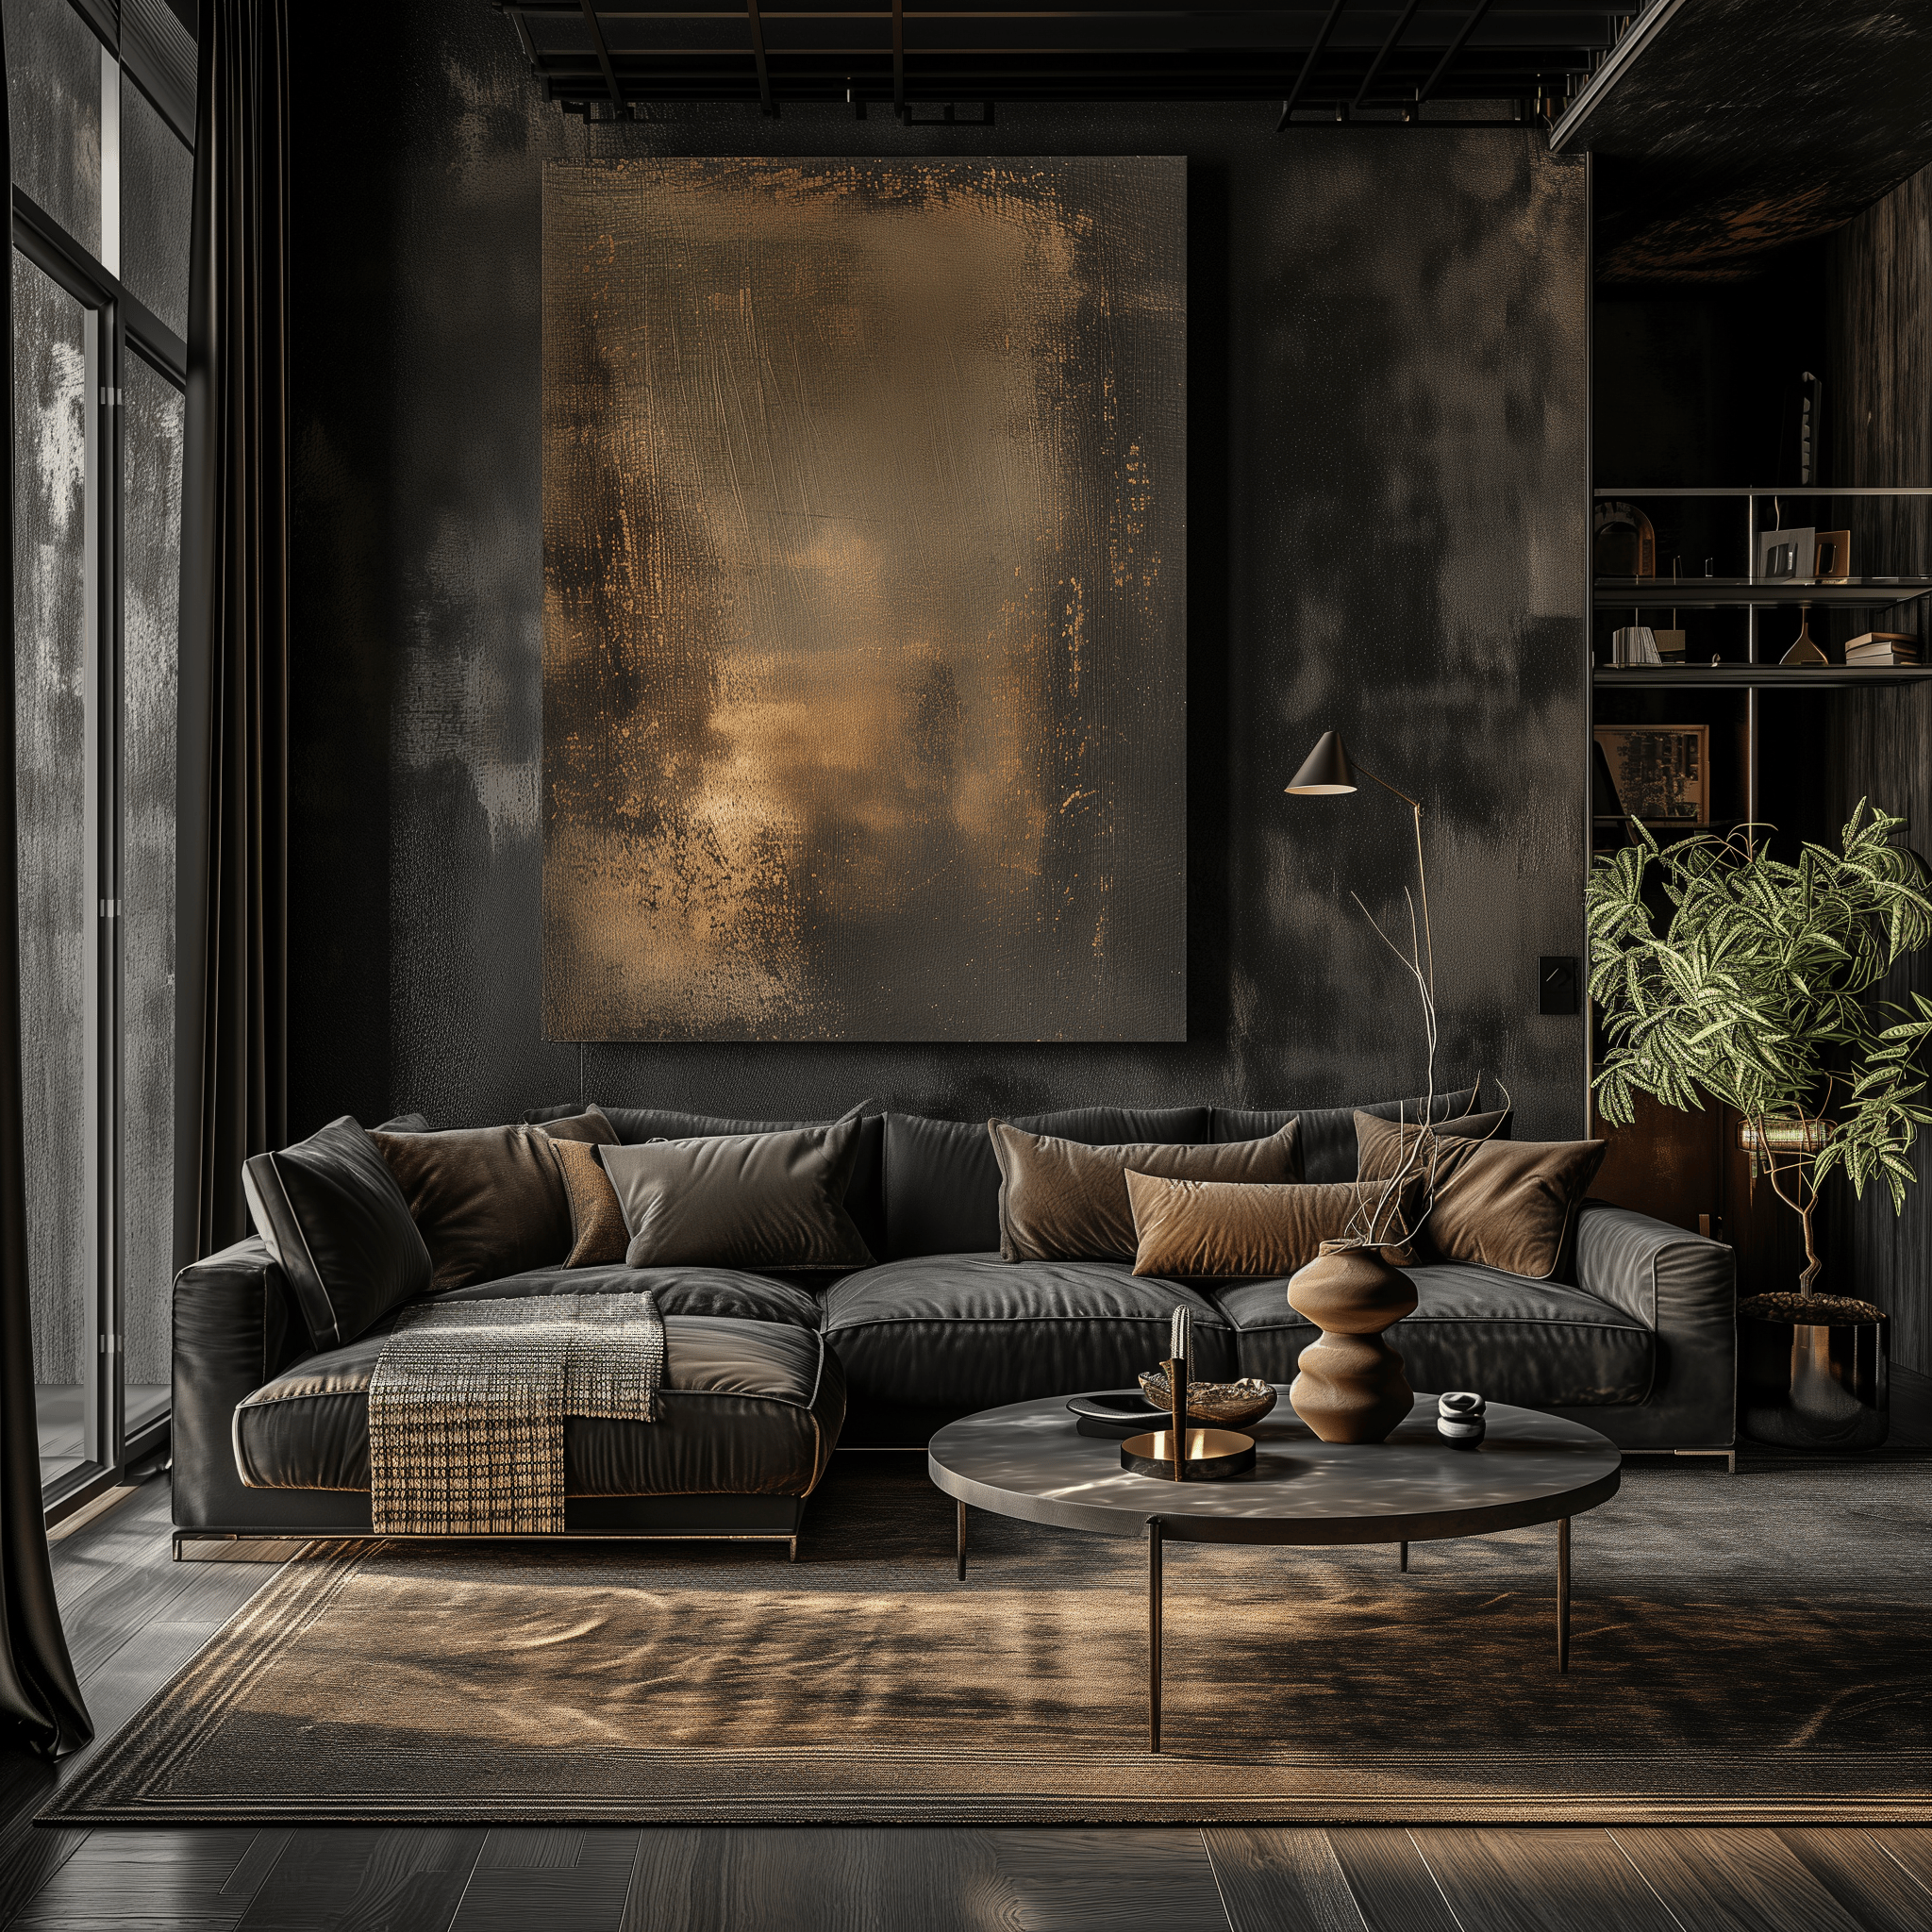 Homely dark living room with eye-level views of luxurious designer furnishings and elegant textiles, illuminated by natural light.